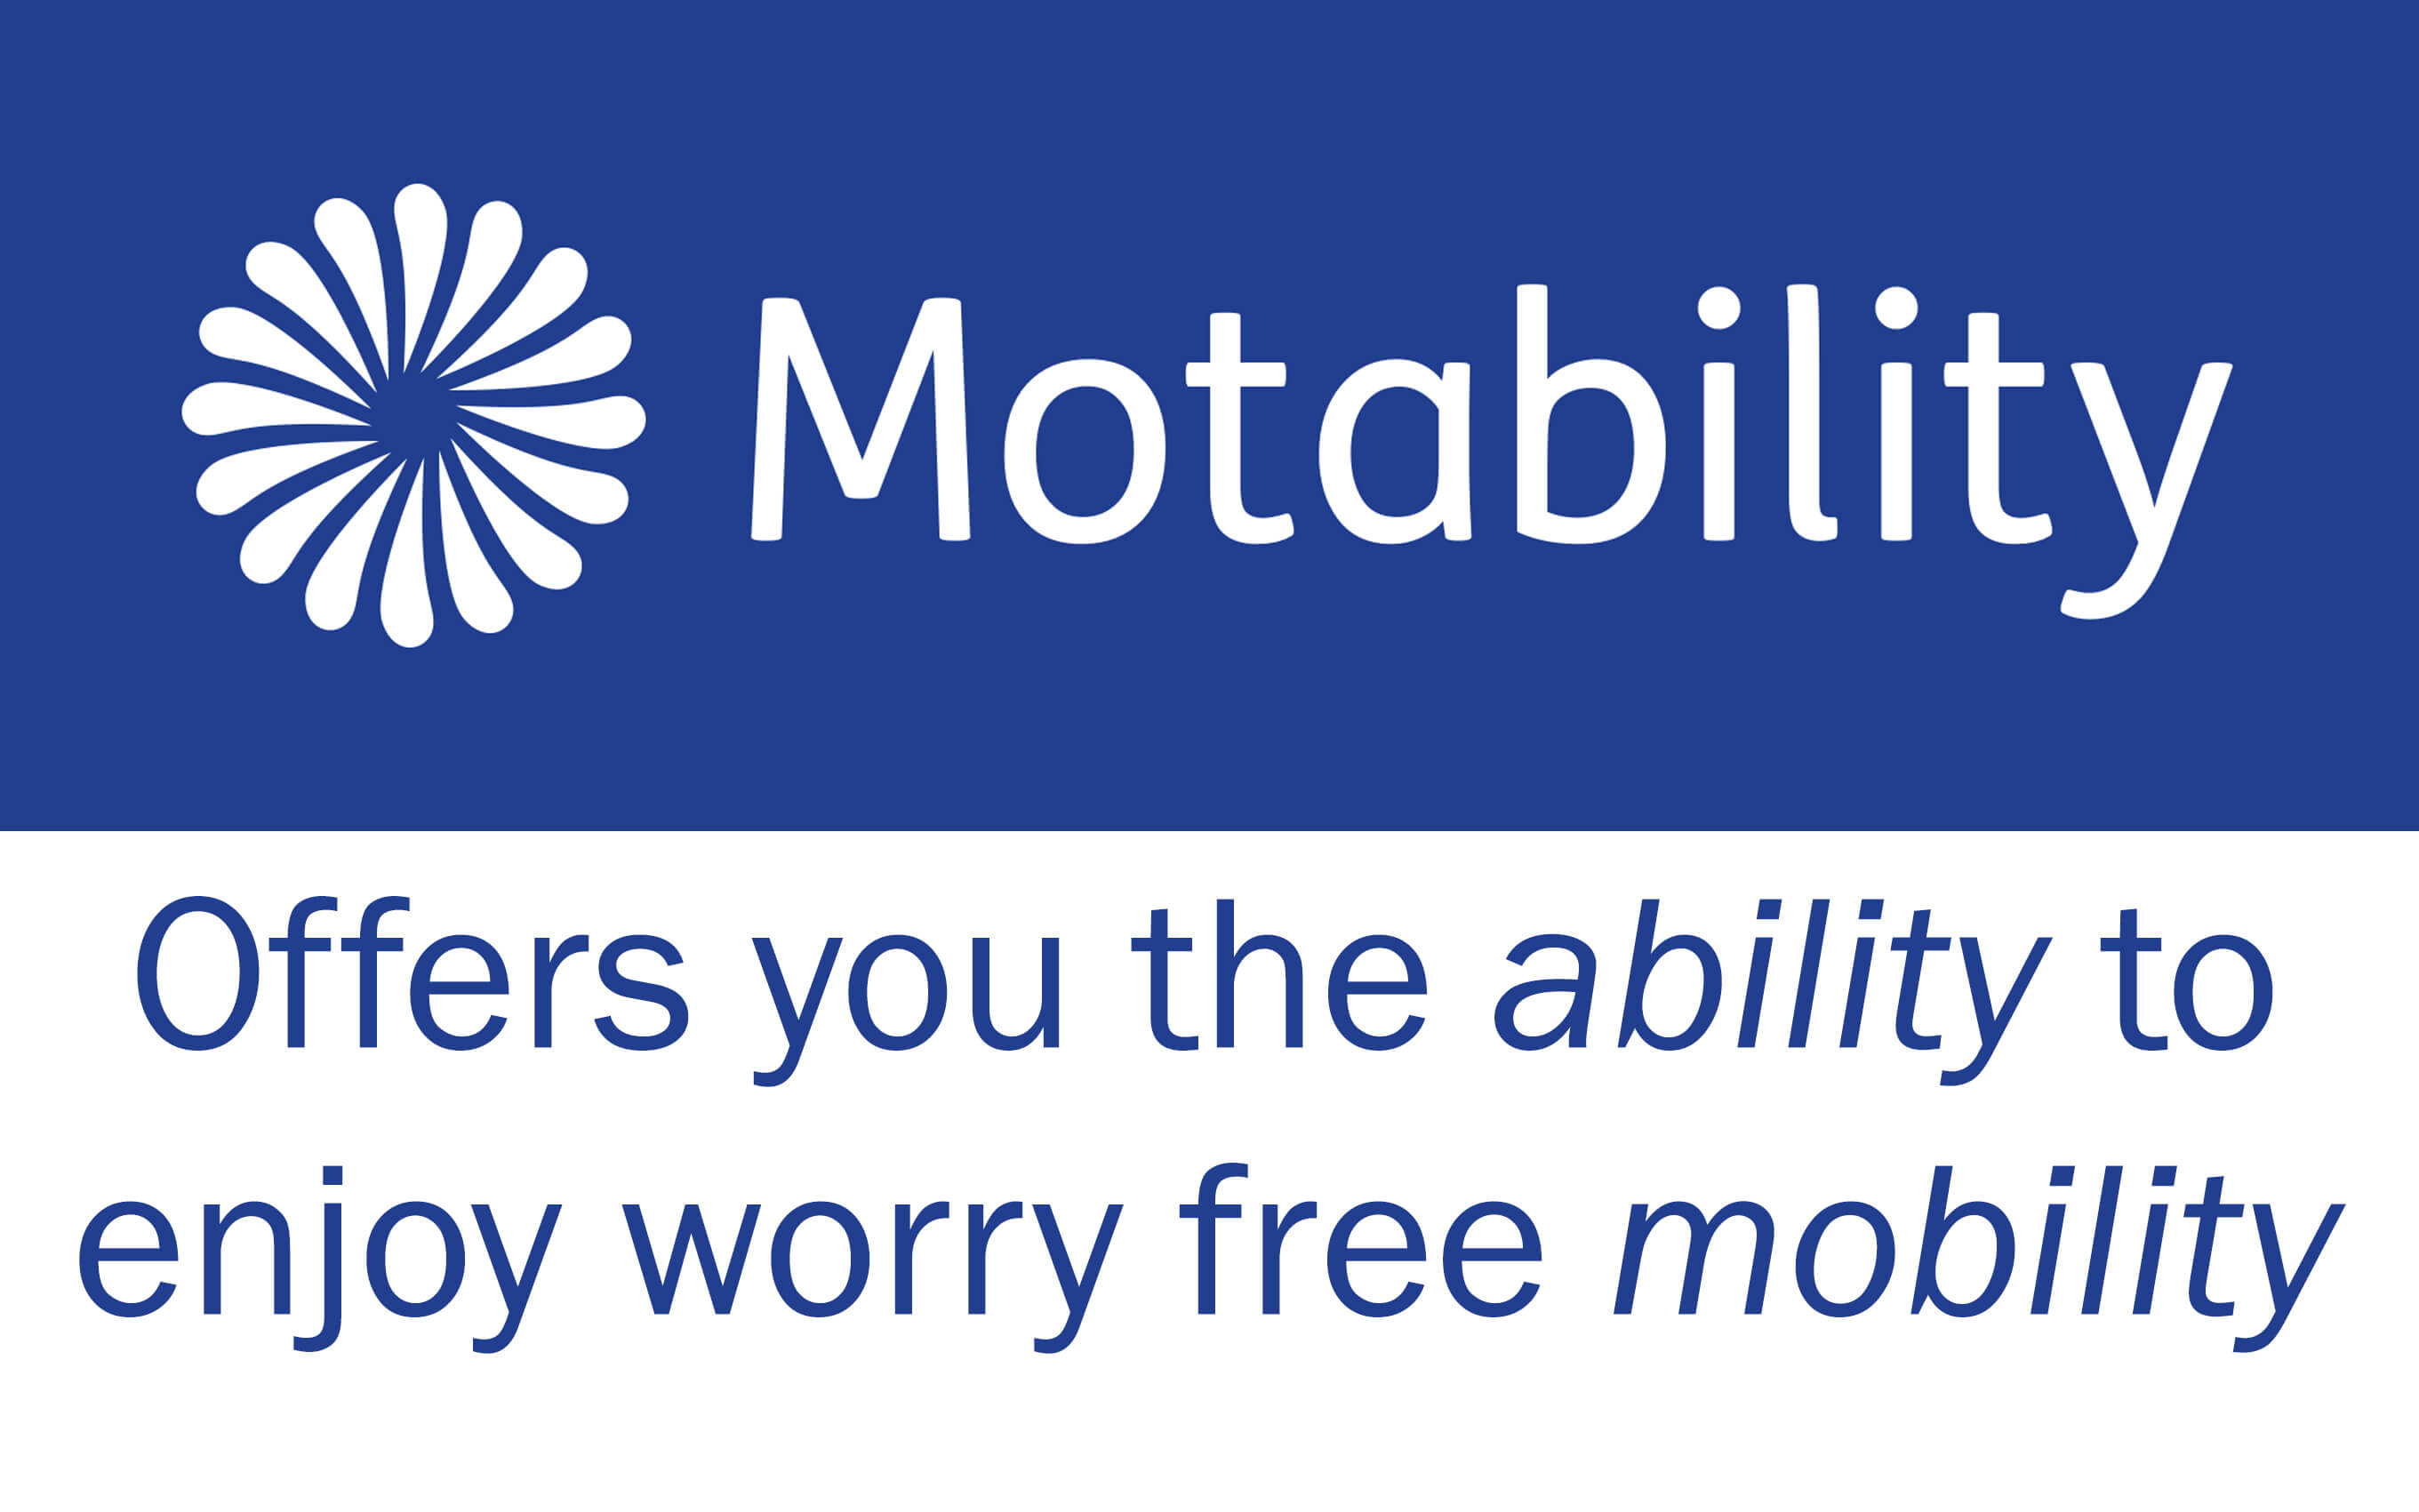 Elite² Plus is now a Motability scooter!